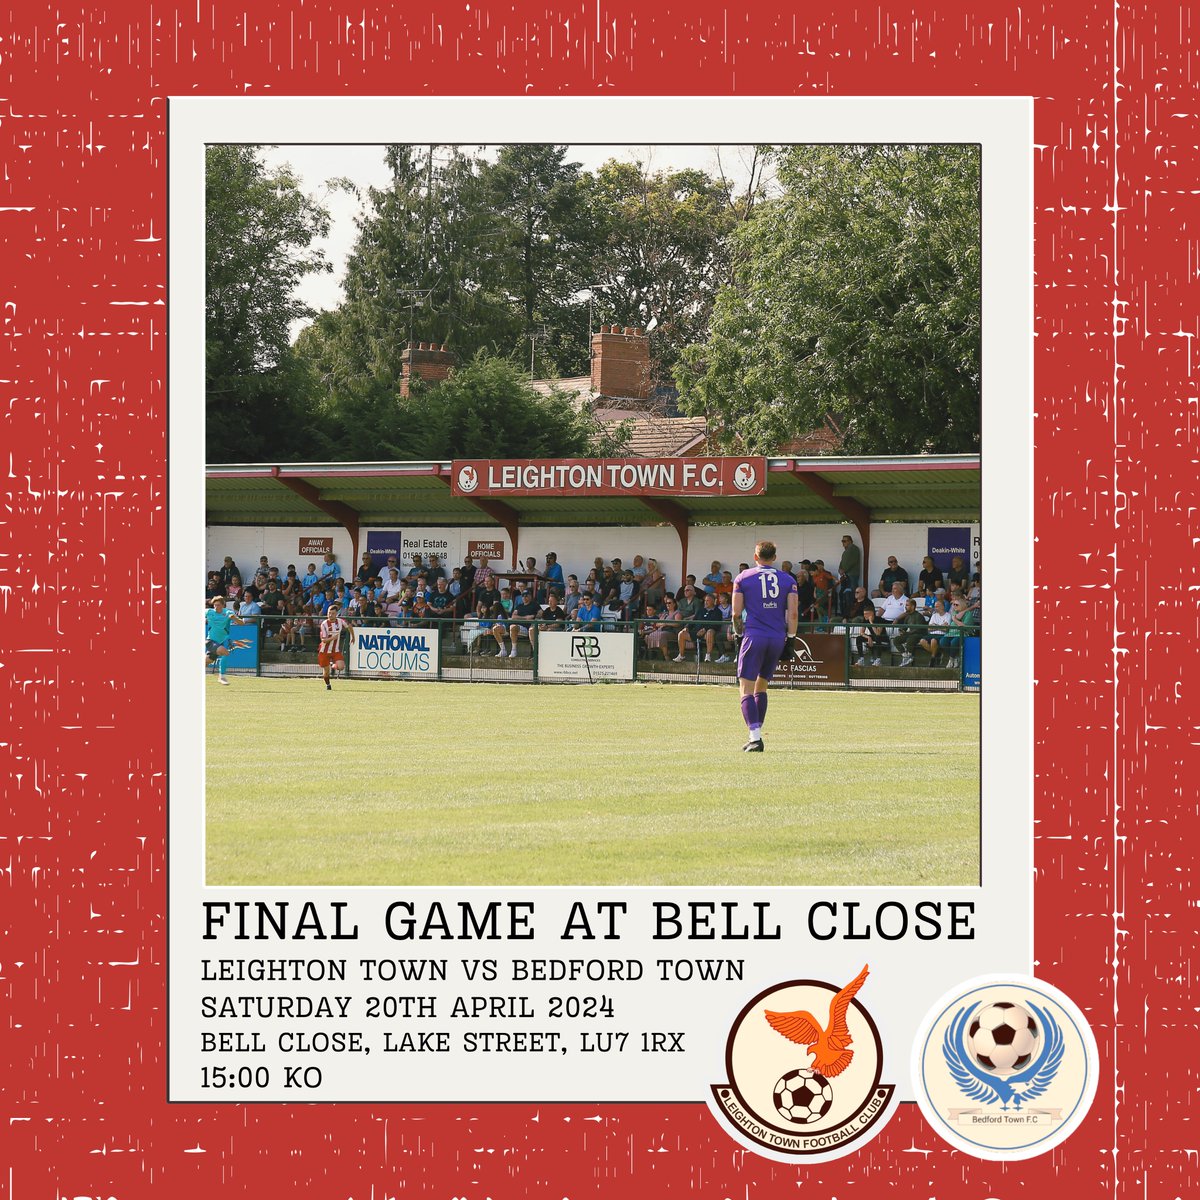 𝘽𝙀𝘿𝙁𝙊𝙍𝘿 𝘼𝙍𝙀 𝘾𝙊𝙈𝙄𝙉𝙂 𝙏𝙊 𝙏𝙊𝙒𝙉 📍 

Next Saturday we welcome promotion hopeful: 

🆚@BedfordTown 
📆Sat 20th Apr 
🏟️Bell Close, LU7 1RX
🎟️Adults £10, Concs £6, 12-17 £3 U11 £0
🍔Open
🍺Open

This is our final game at home this season 🏡

#YourTownYourTeam